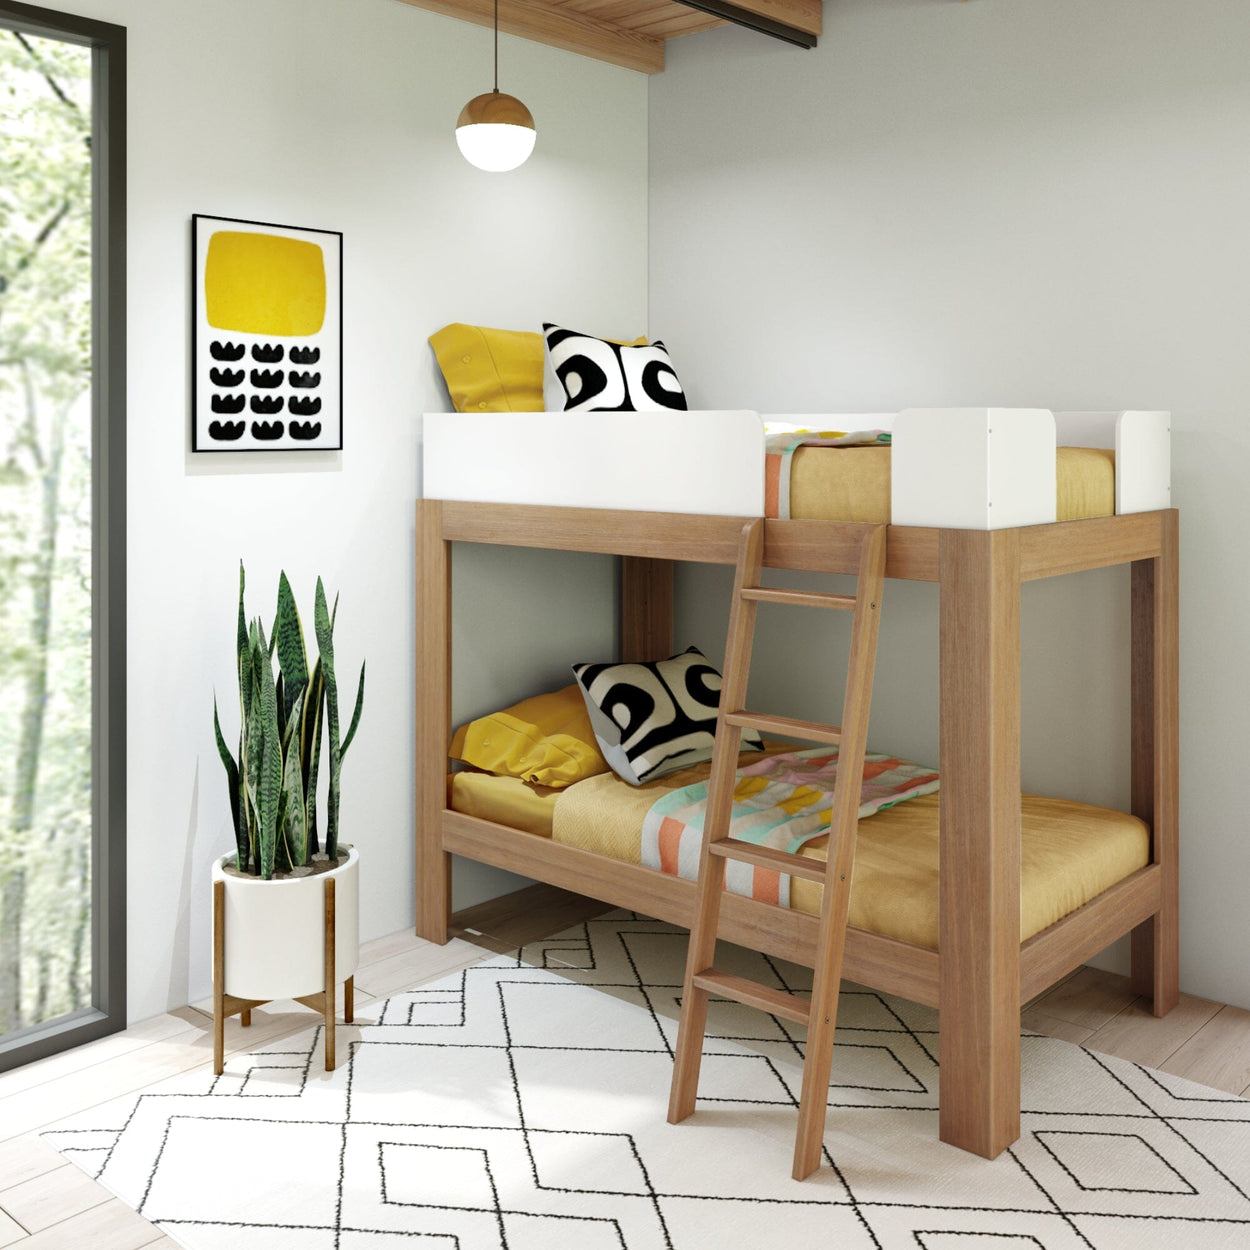 200201-527 : Bunk Beds Mid-Century Modern Twin over Twin Bunk Bed, White/Pecan